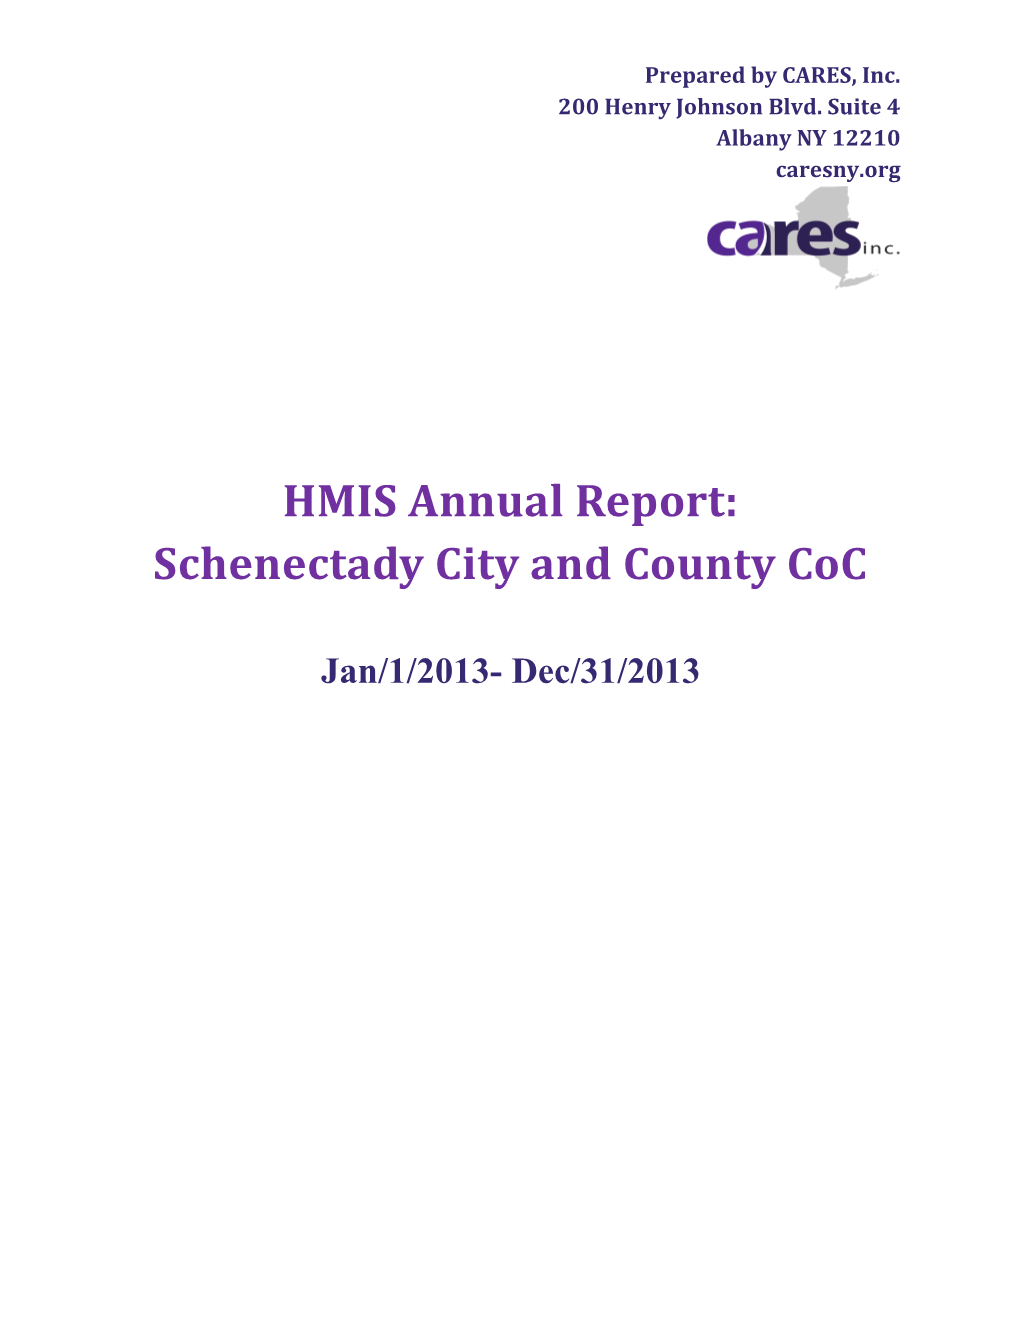 HMIS Annual Report: Schenectady City and County Coc